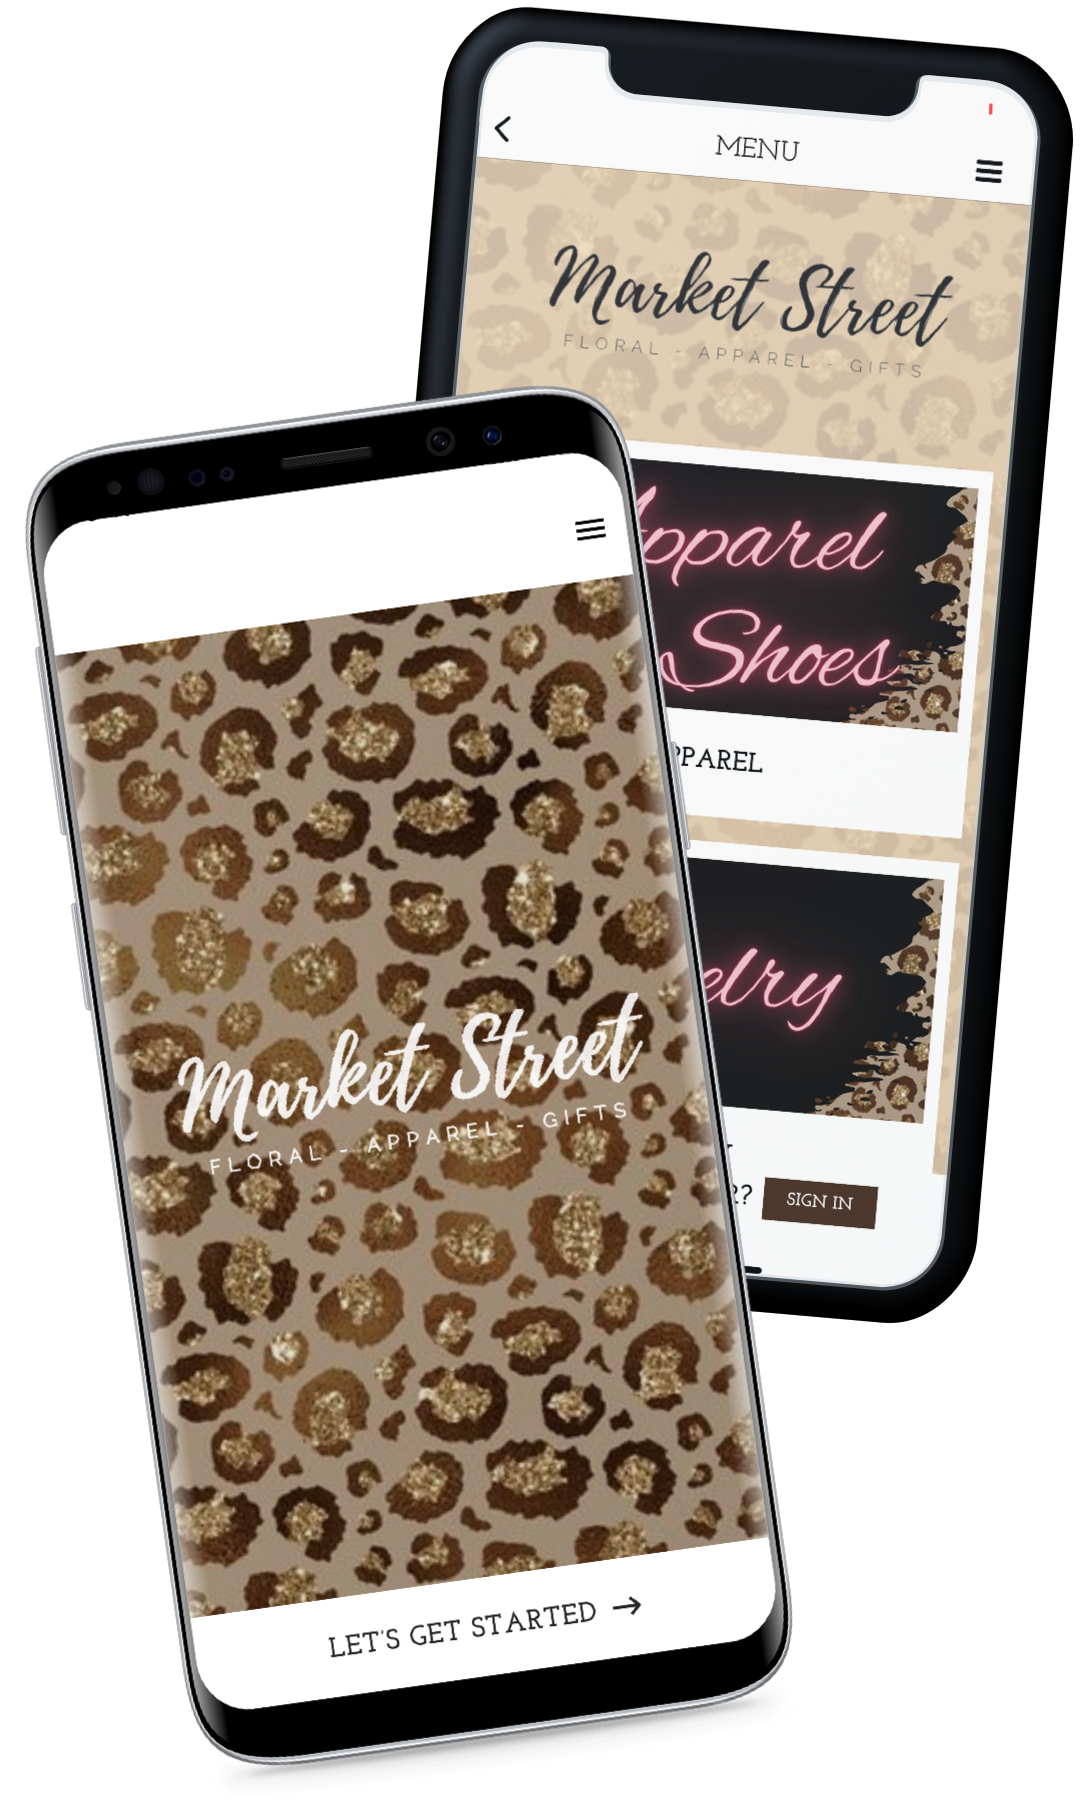 Two iPhones showing the Market Street Floral App splash page and menu page